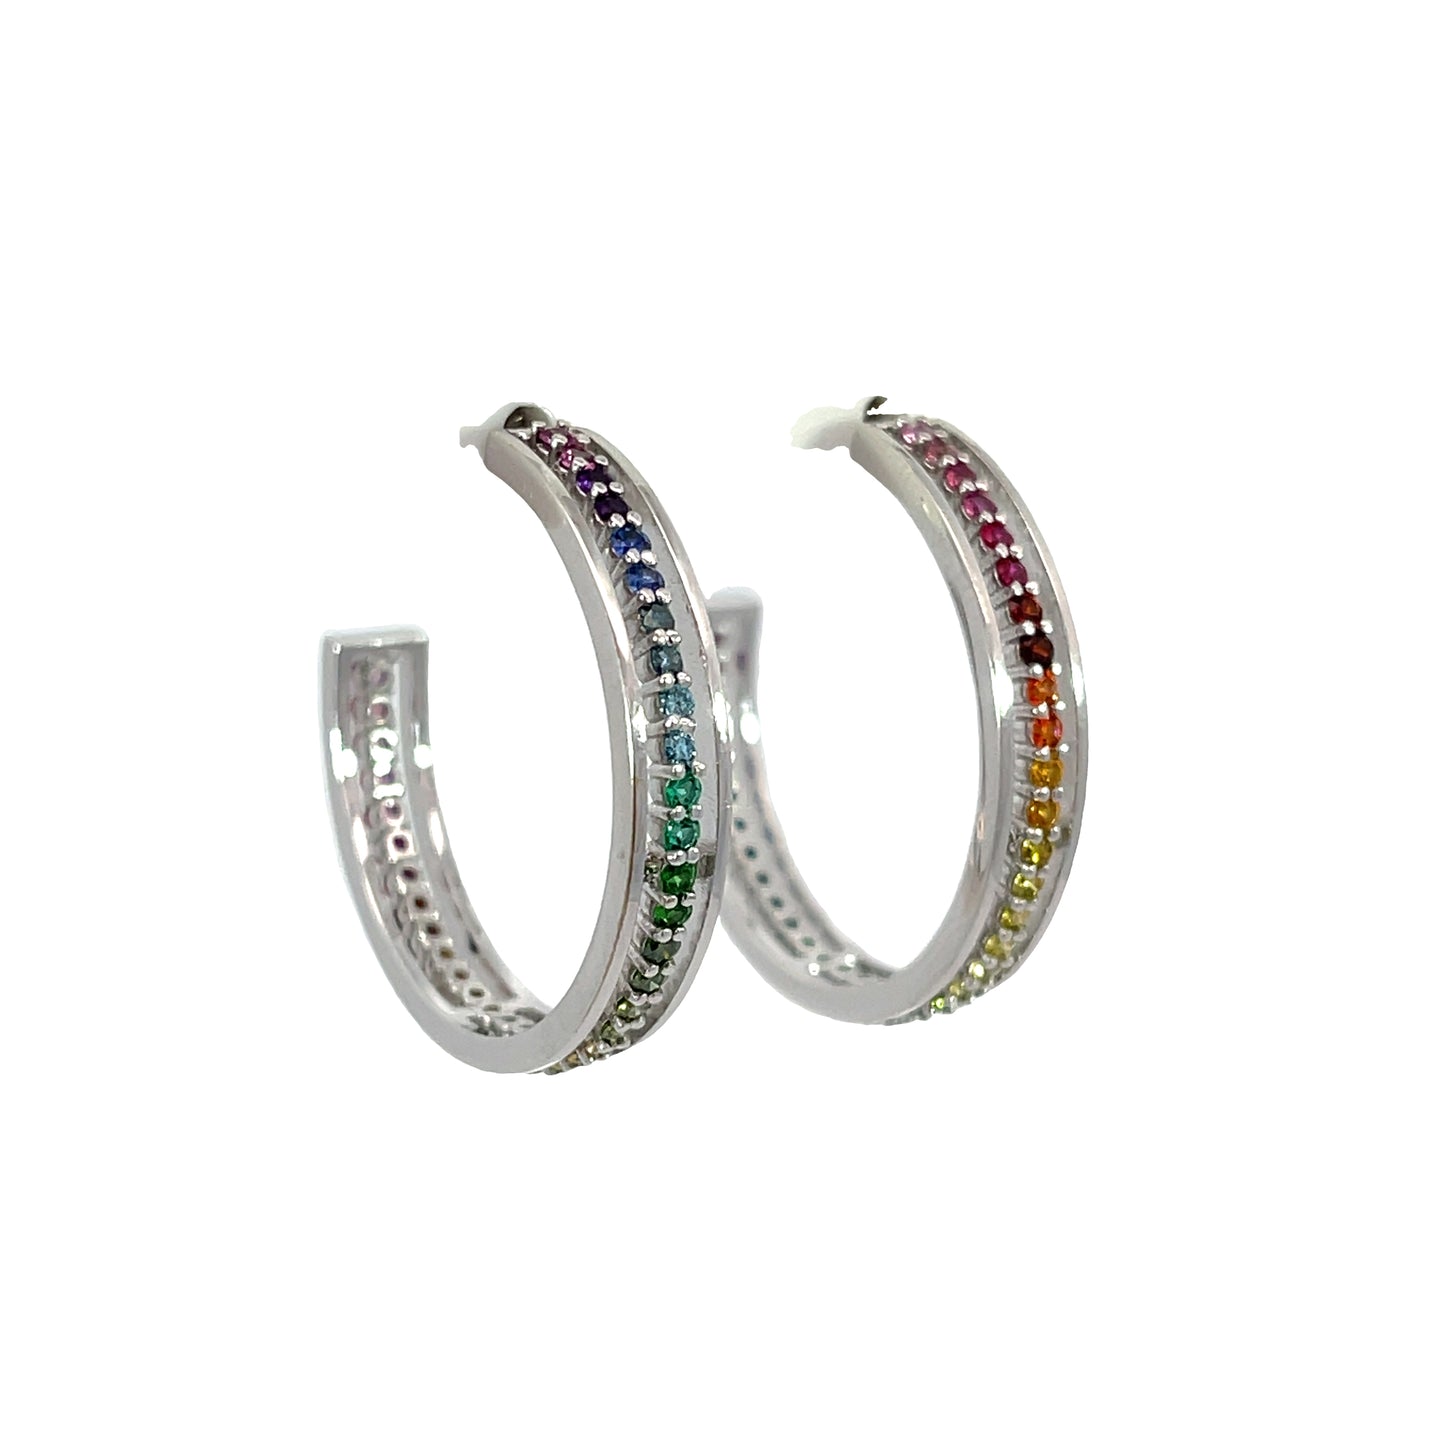 18k White Gold "Equality" Hoops